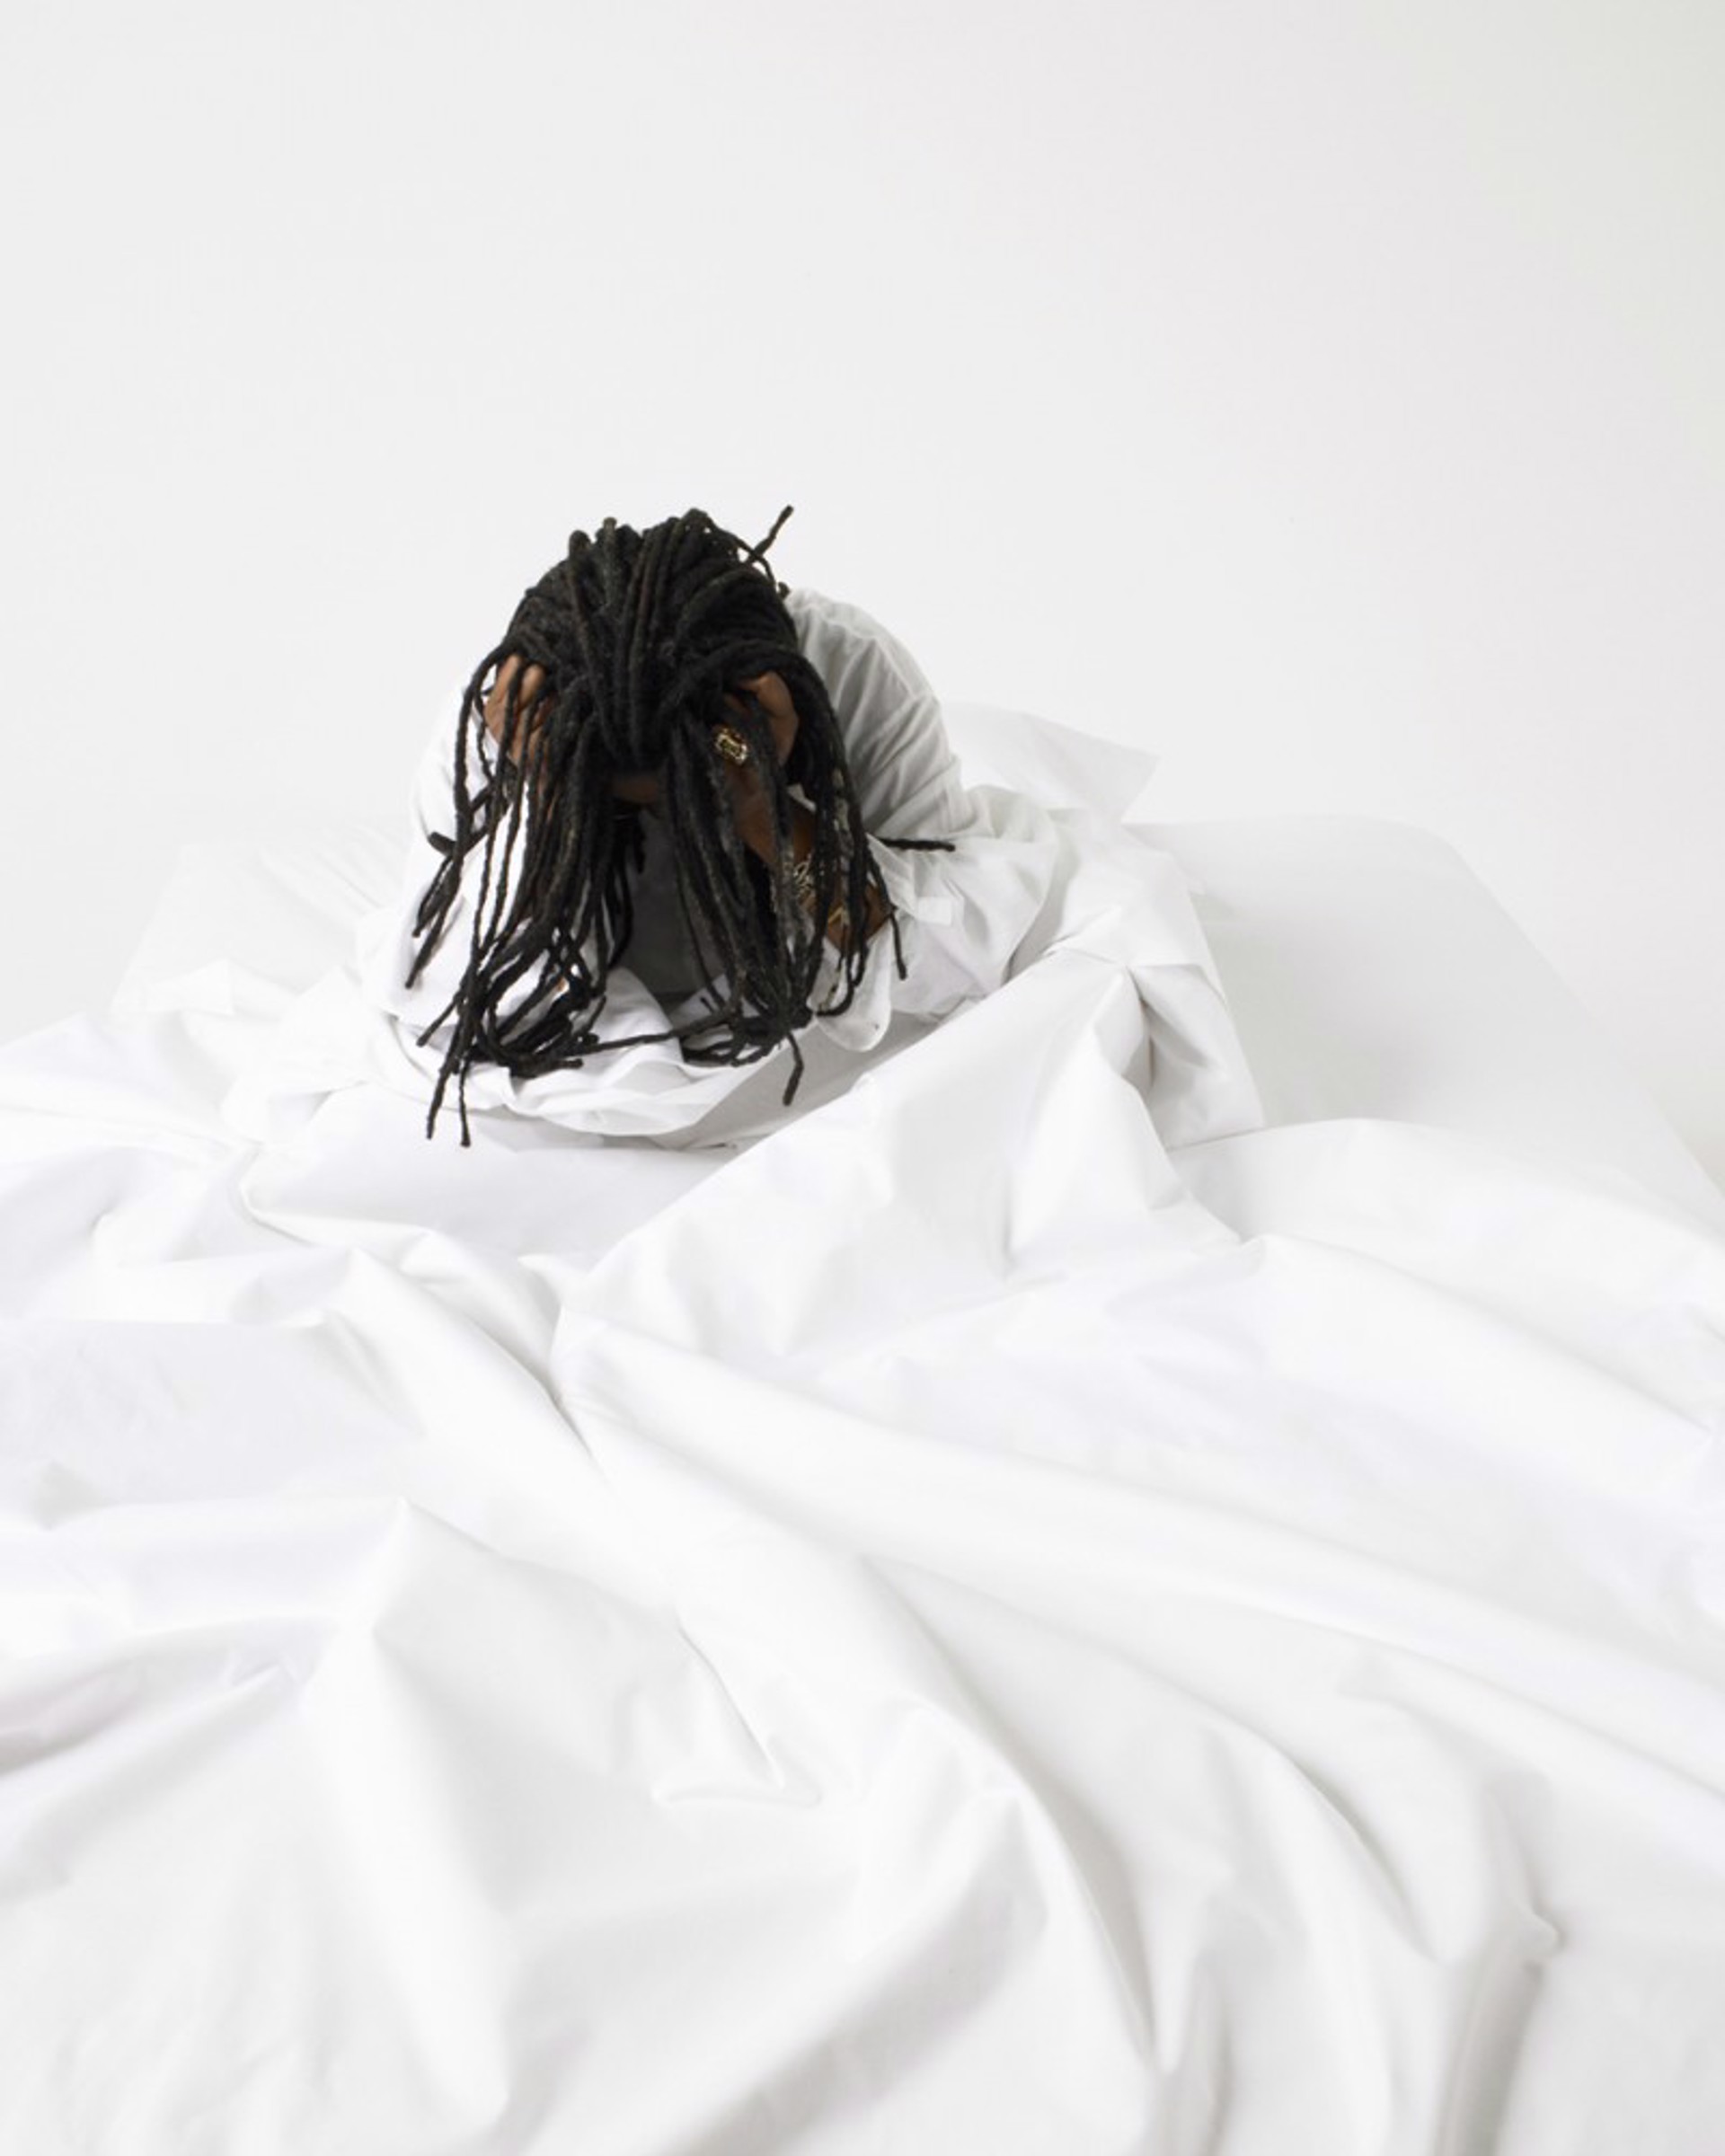 07036 Whoopi Goldberg On the White Bed Color by Timothy White